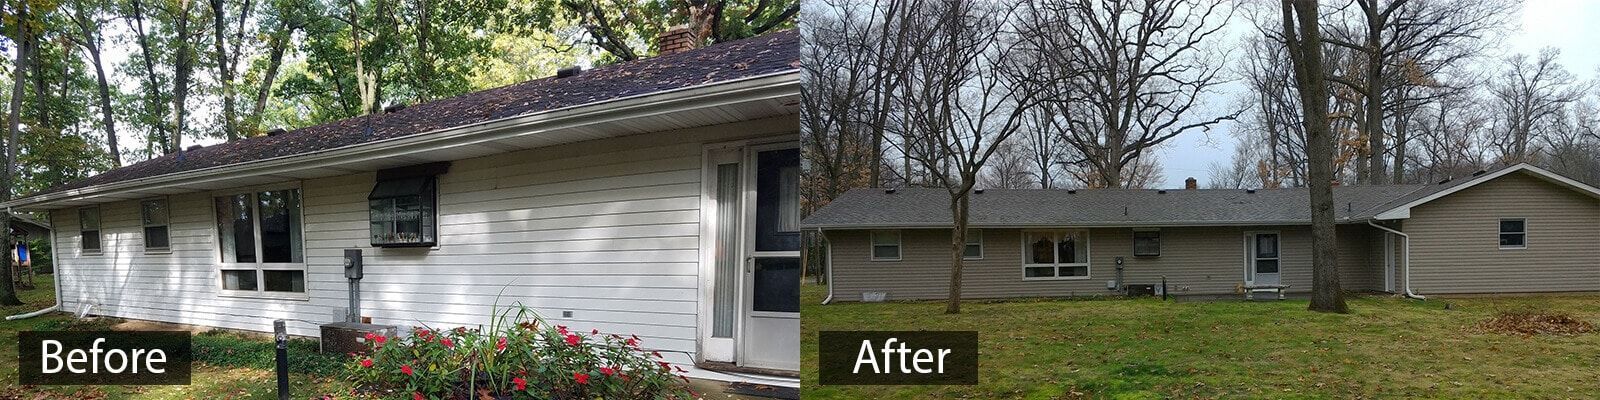 Flanders before and after - South Bend, IN - A&M Home Services